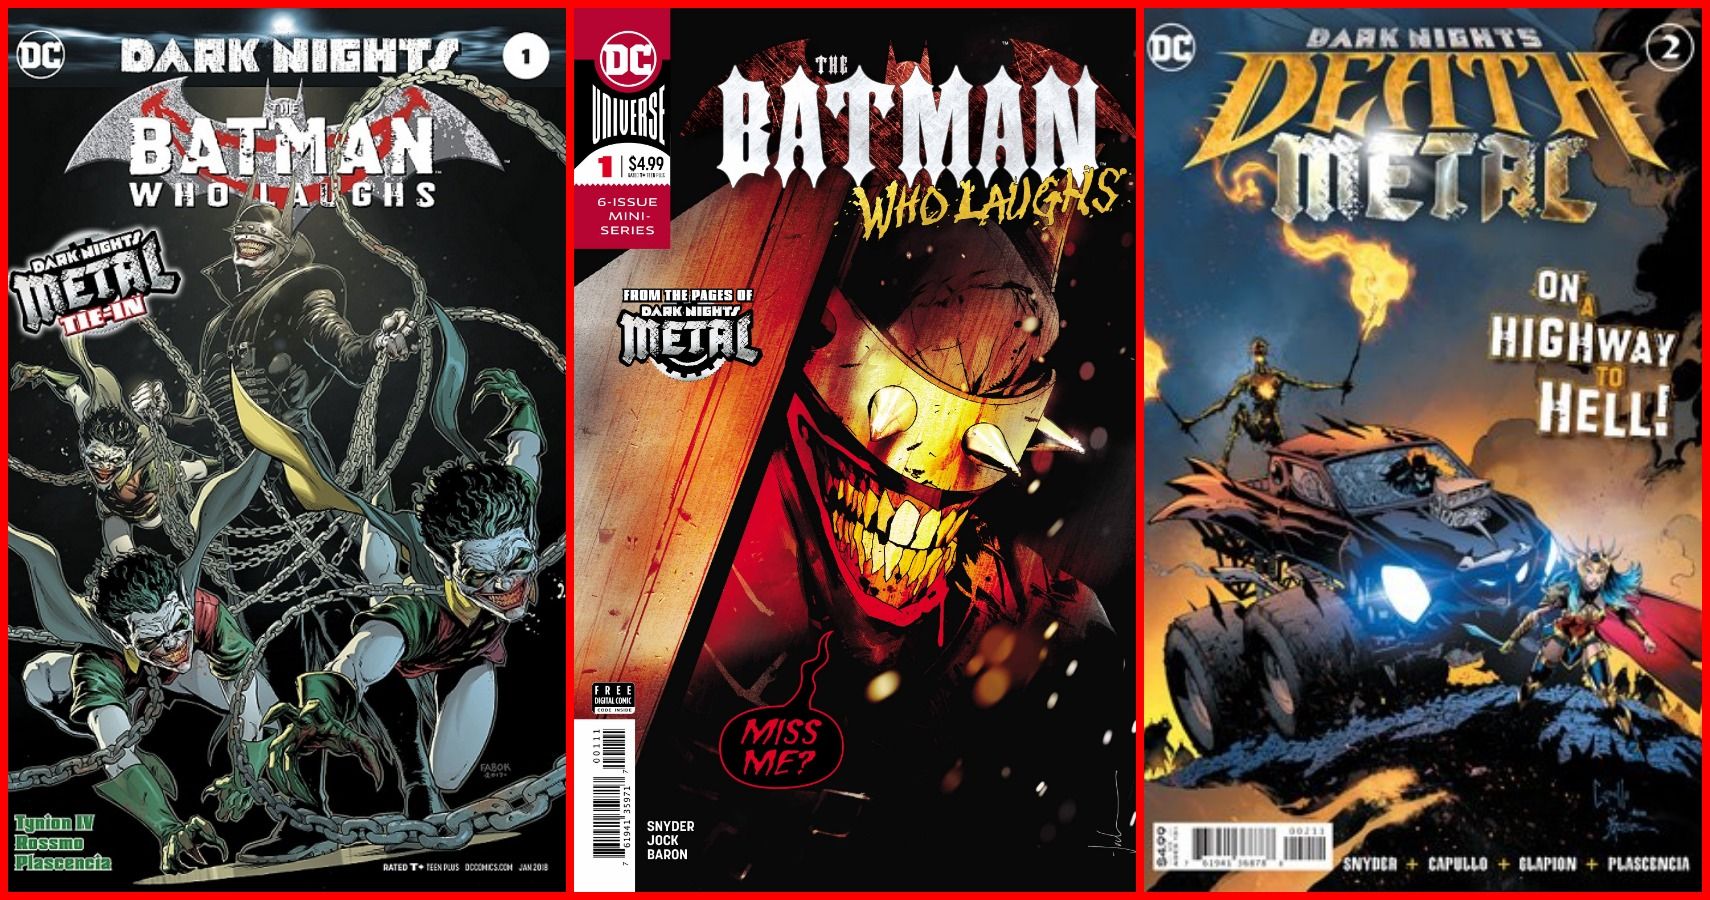 The Batman Who Laughs Key Issues Comic Book Covers.